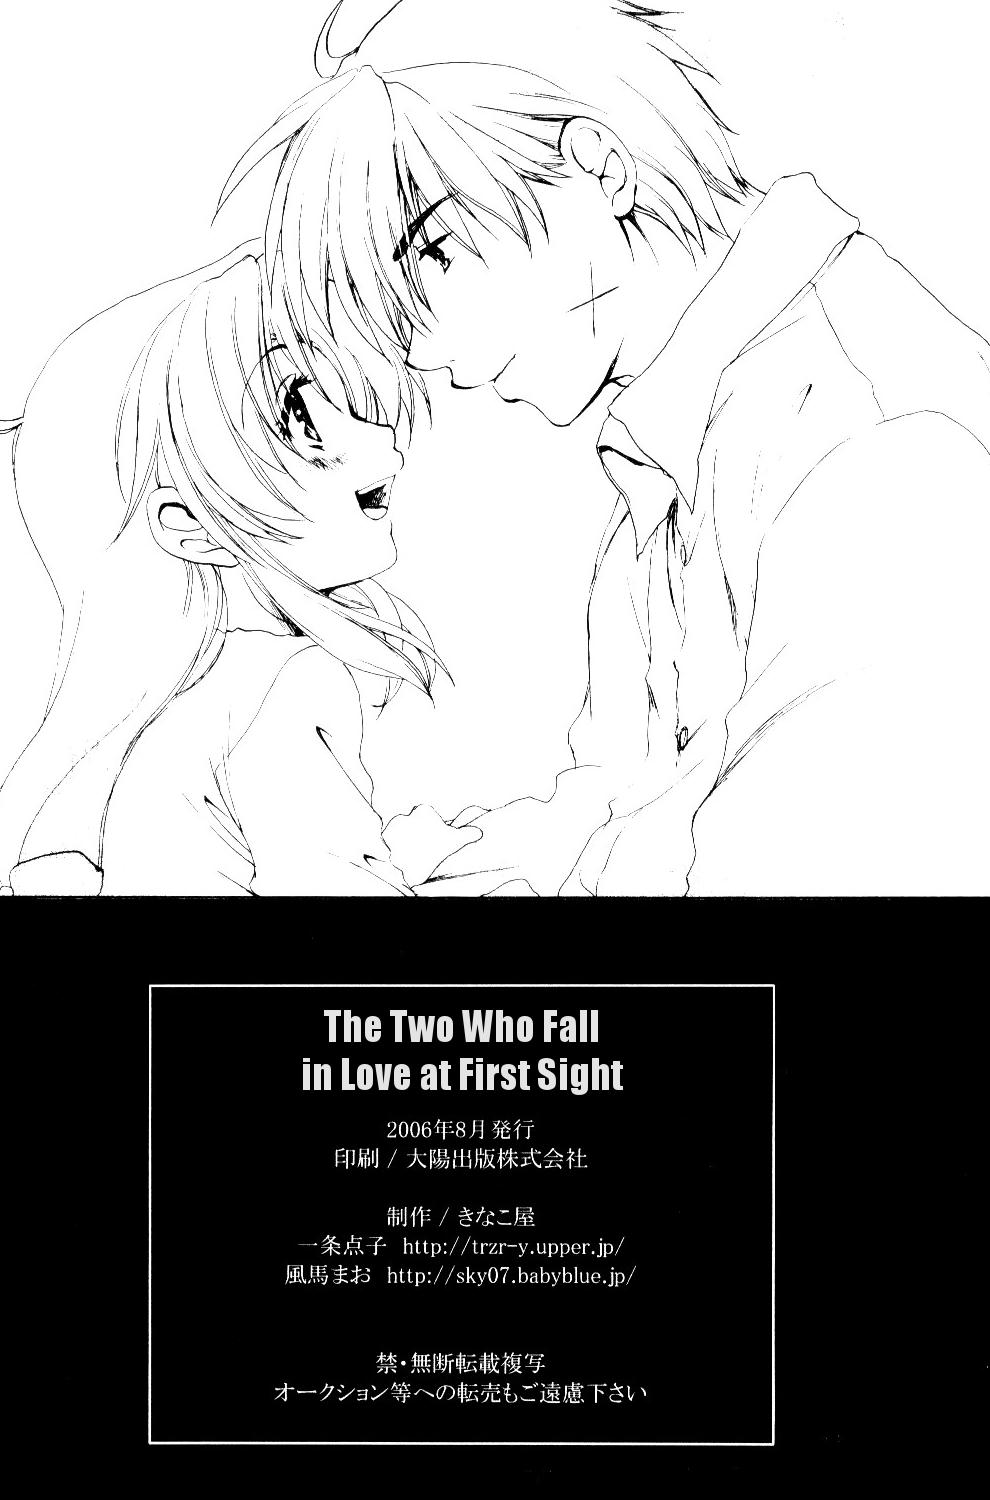 Massive Misomeru Futari | The Two Who Fall in Love at First Sight - Full metal panic Beauty - Page 113